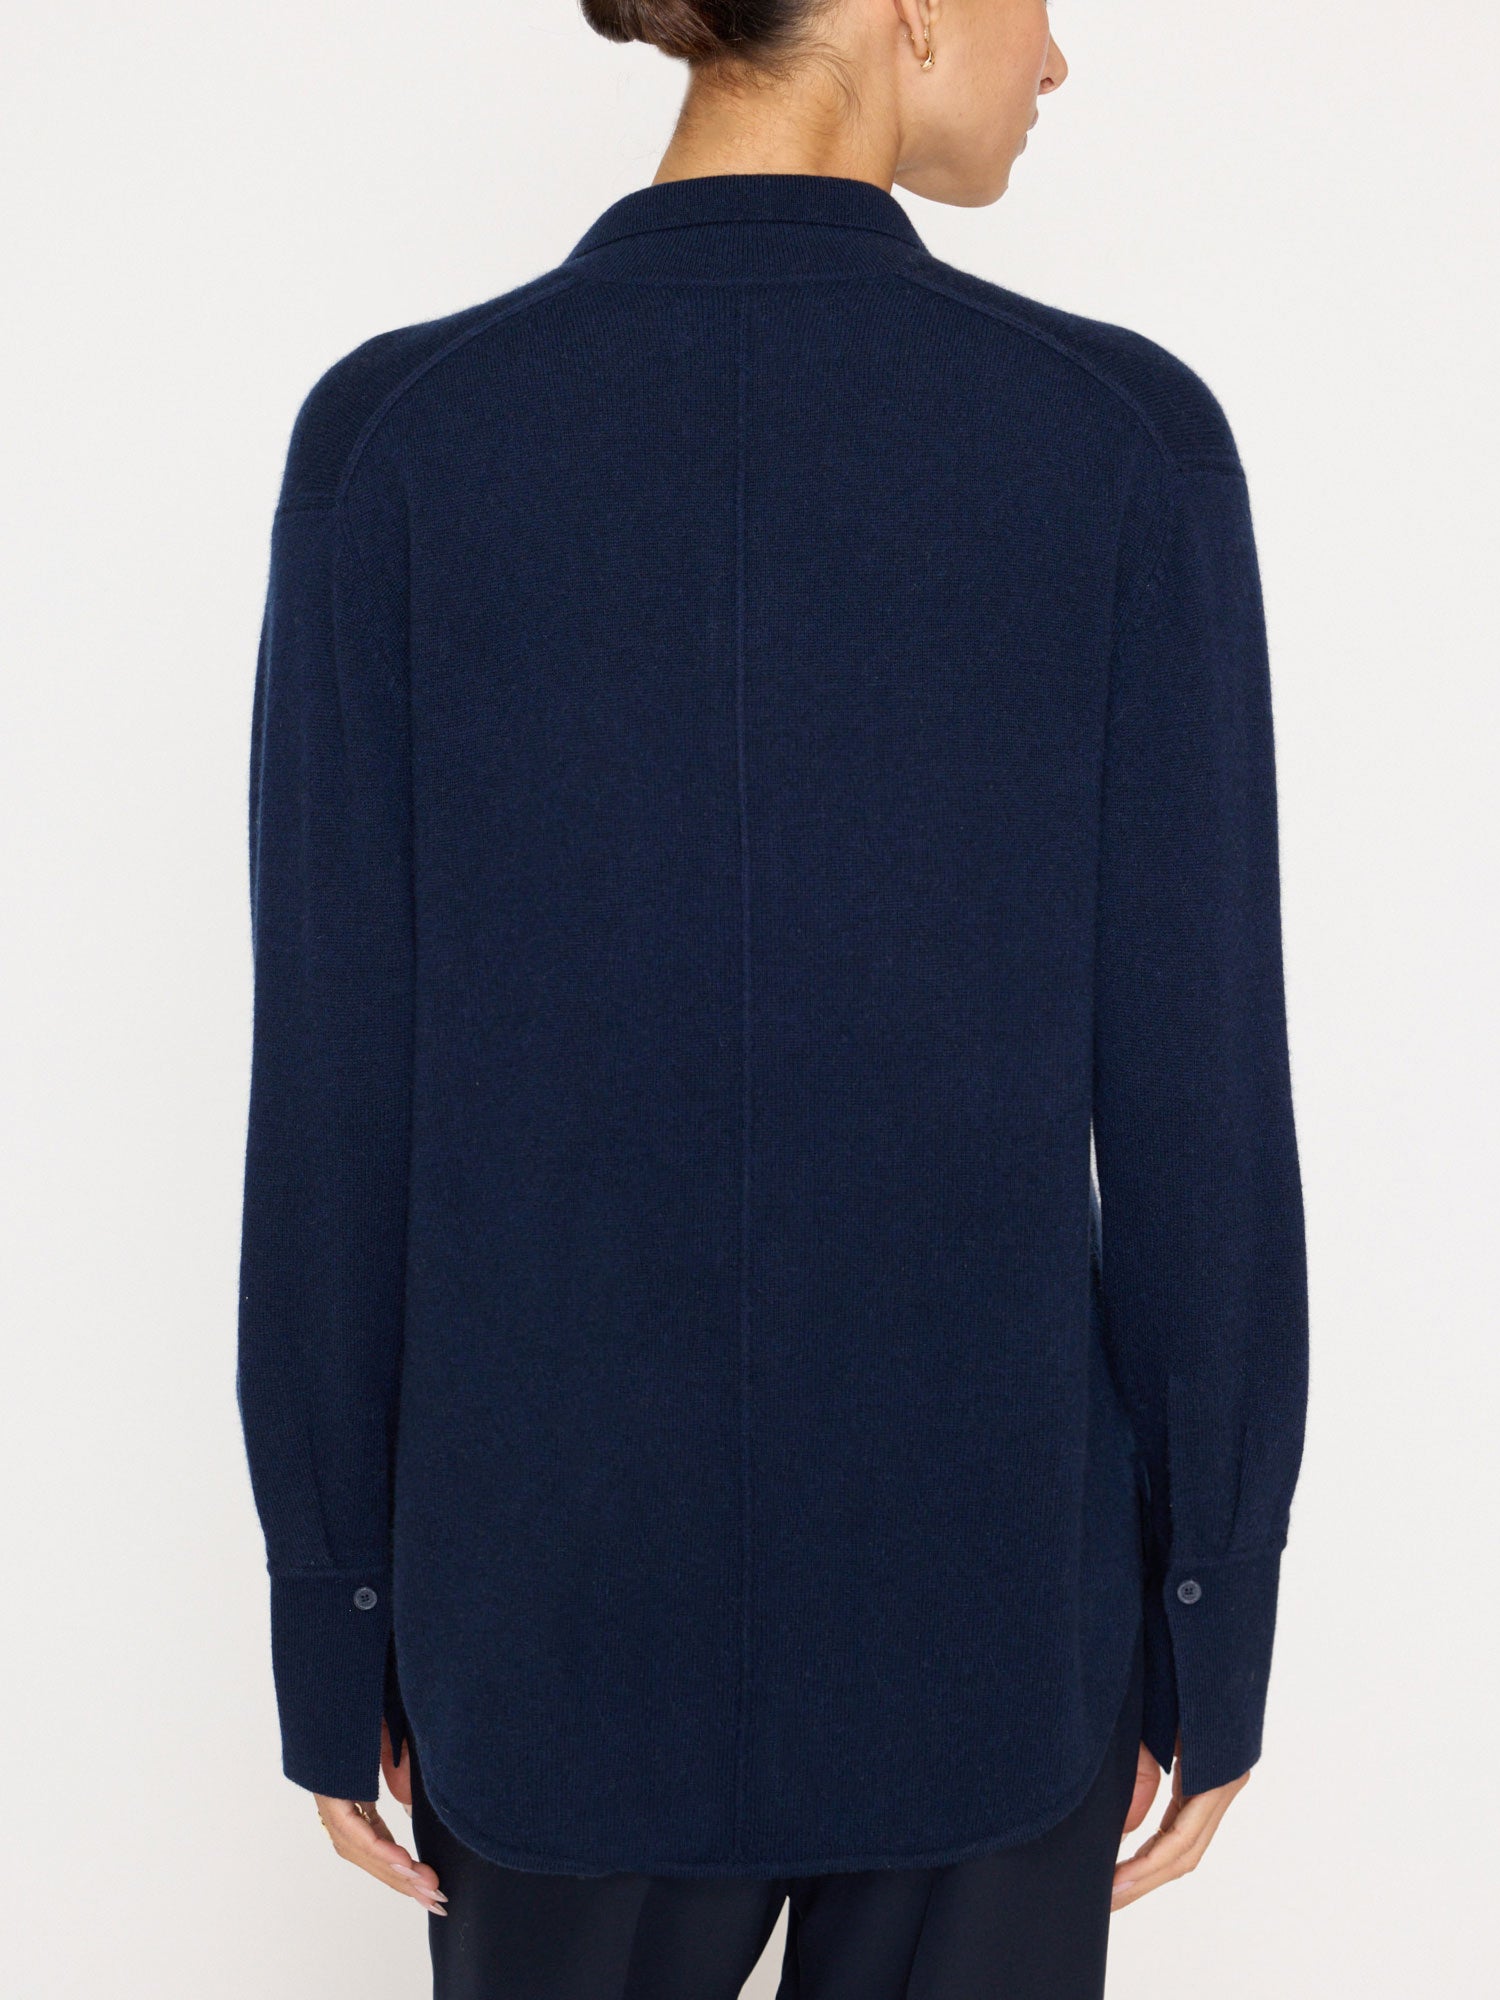 Andre cashmere buttondown navy shacket back view